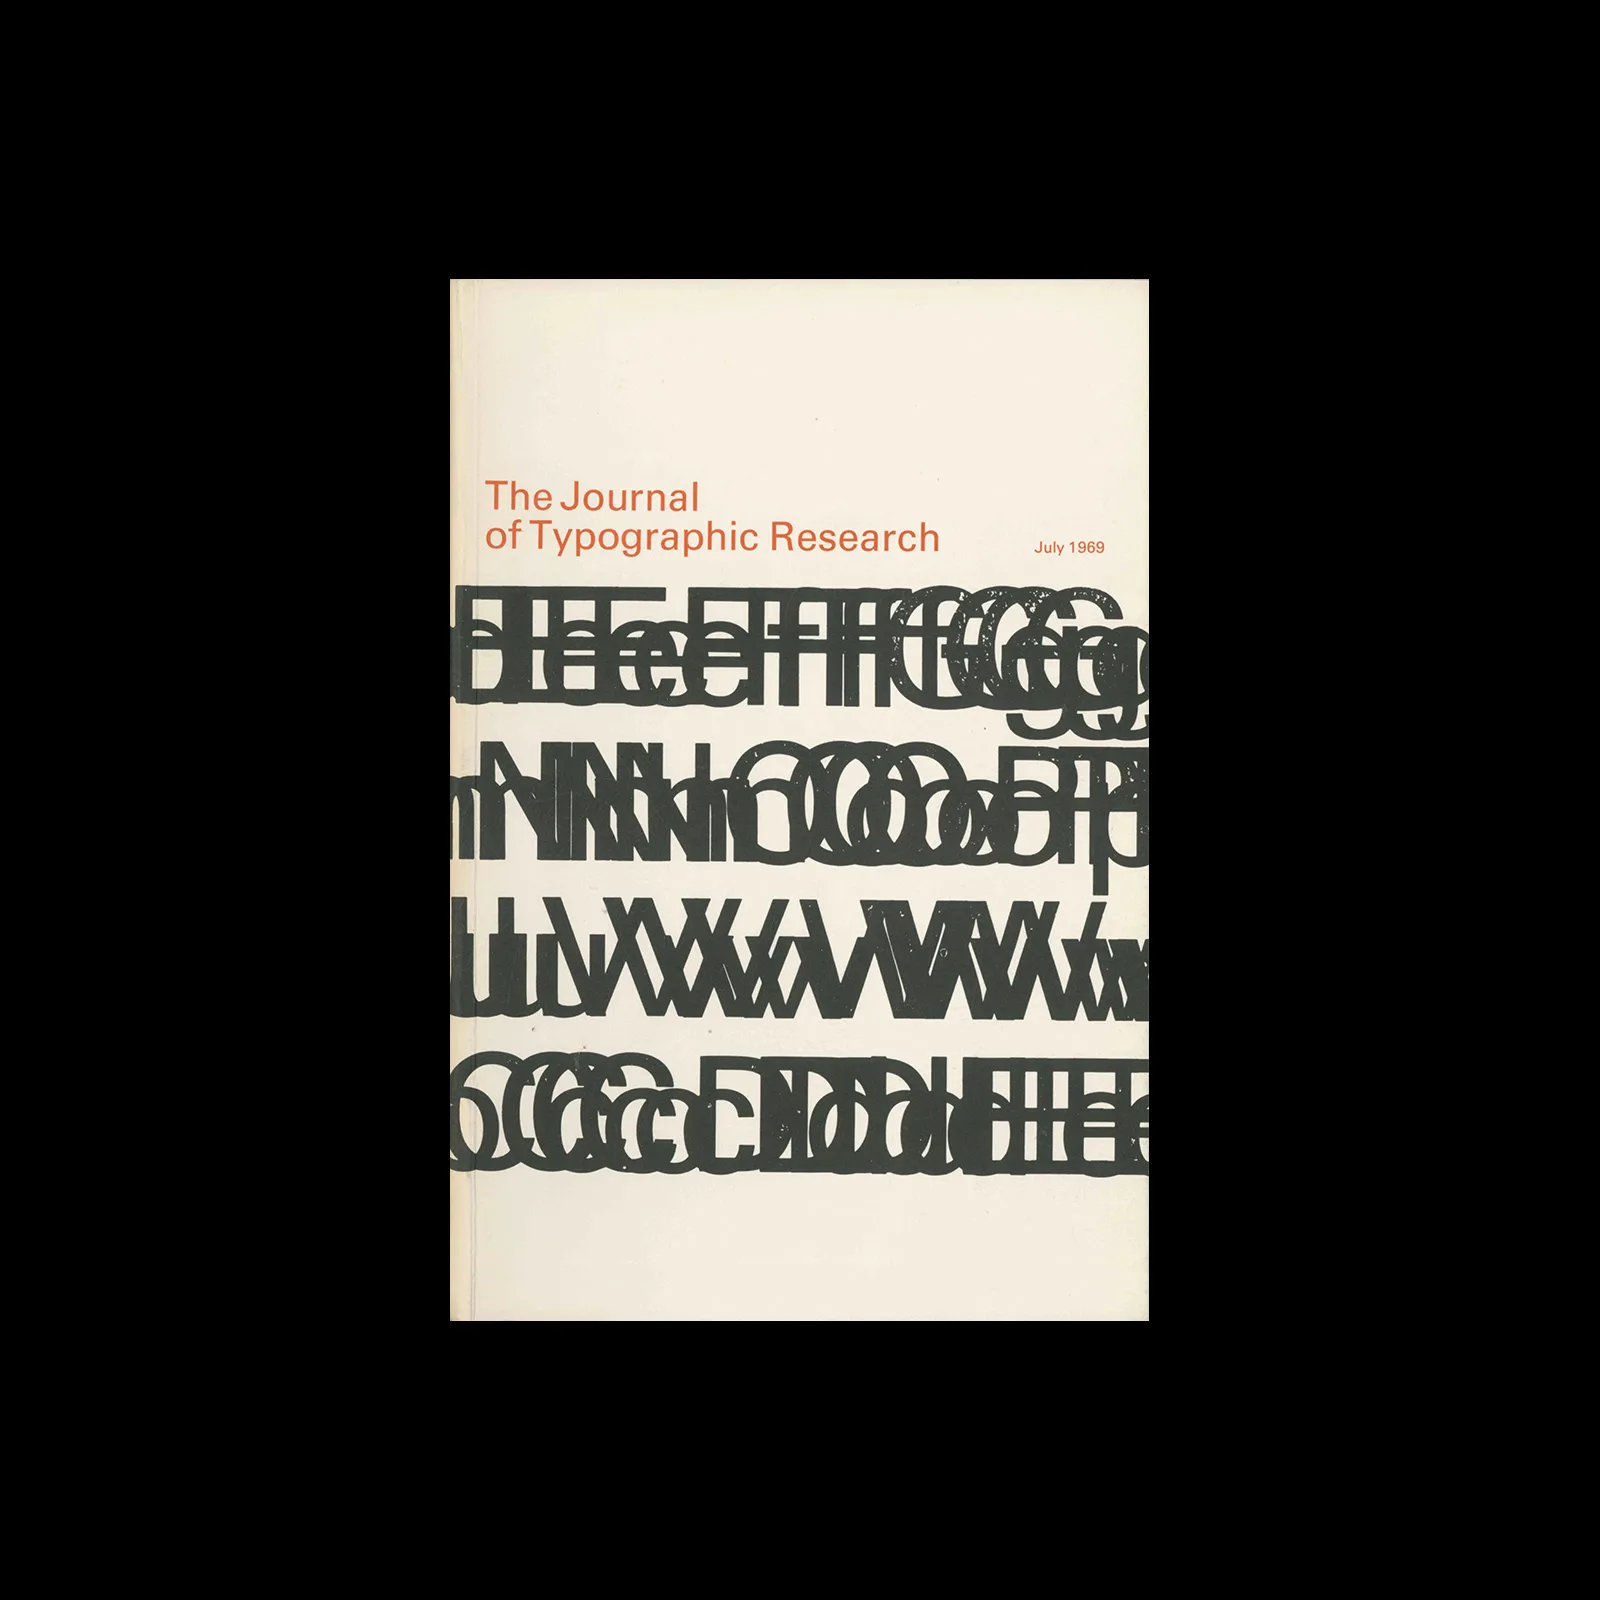 Visible Language (The Journal of Typographic Research, Vol 03, 03, July 1969